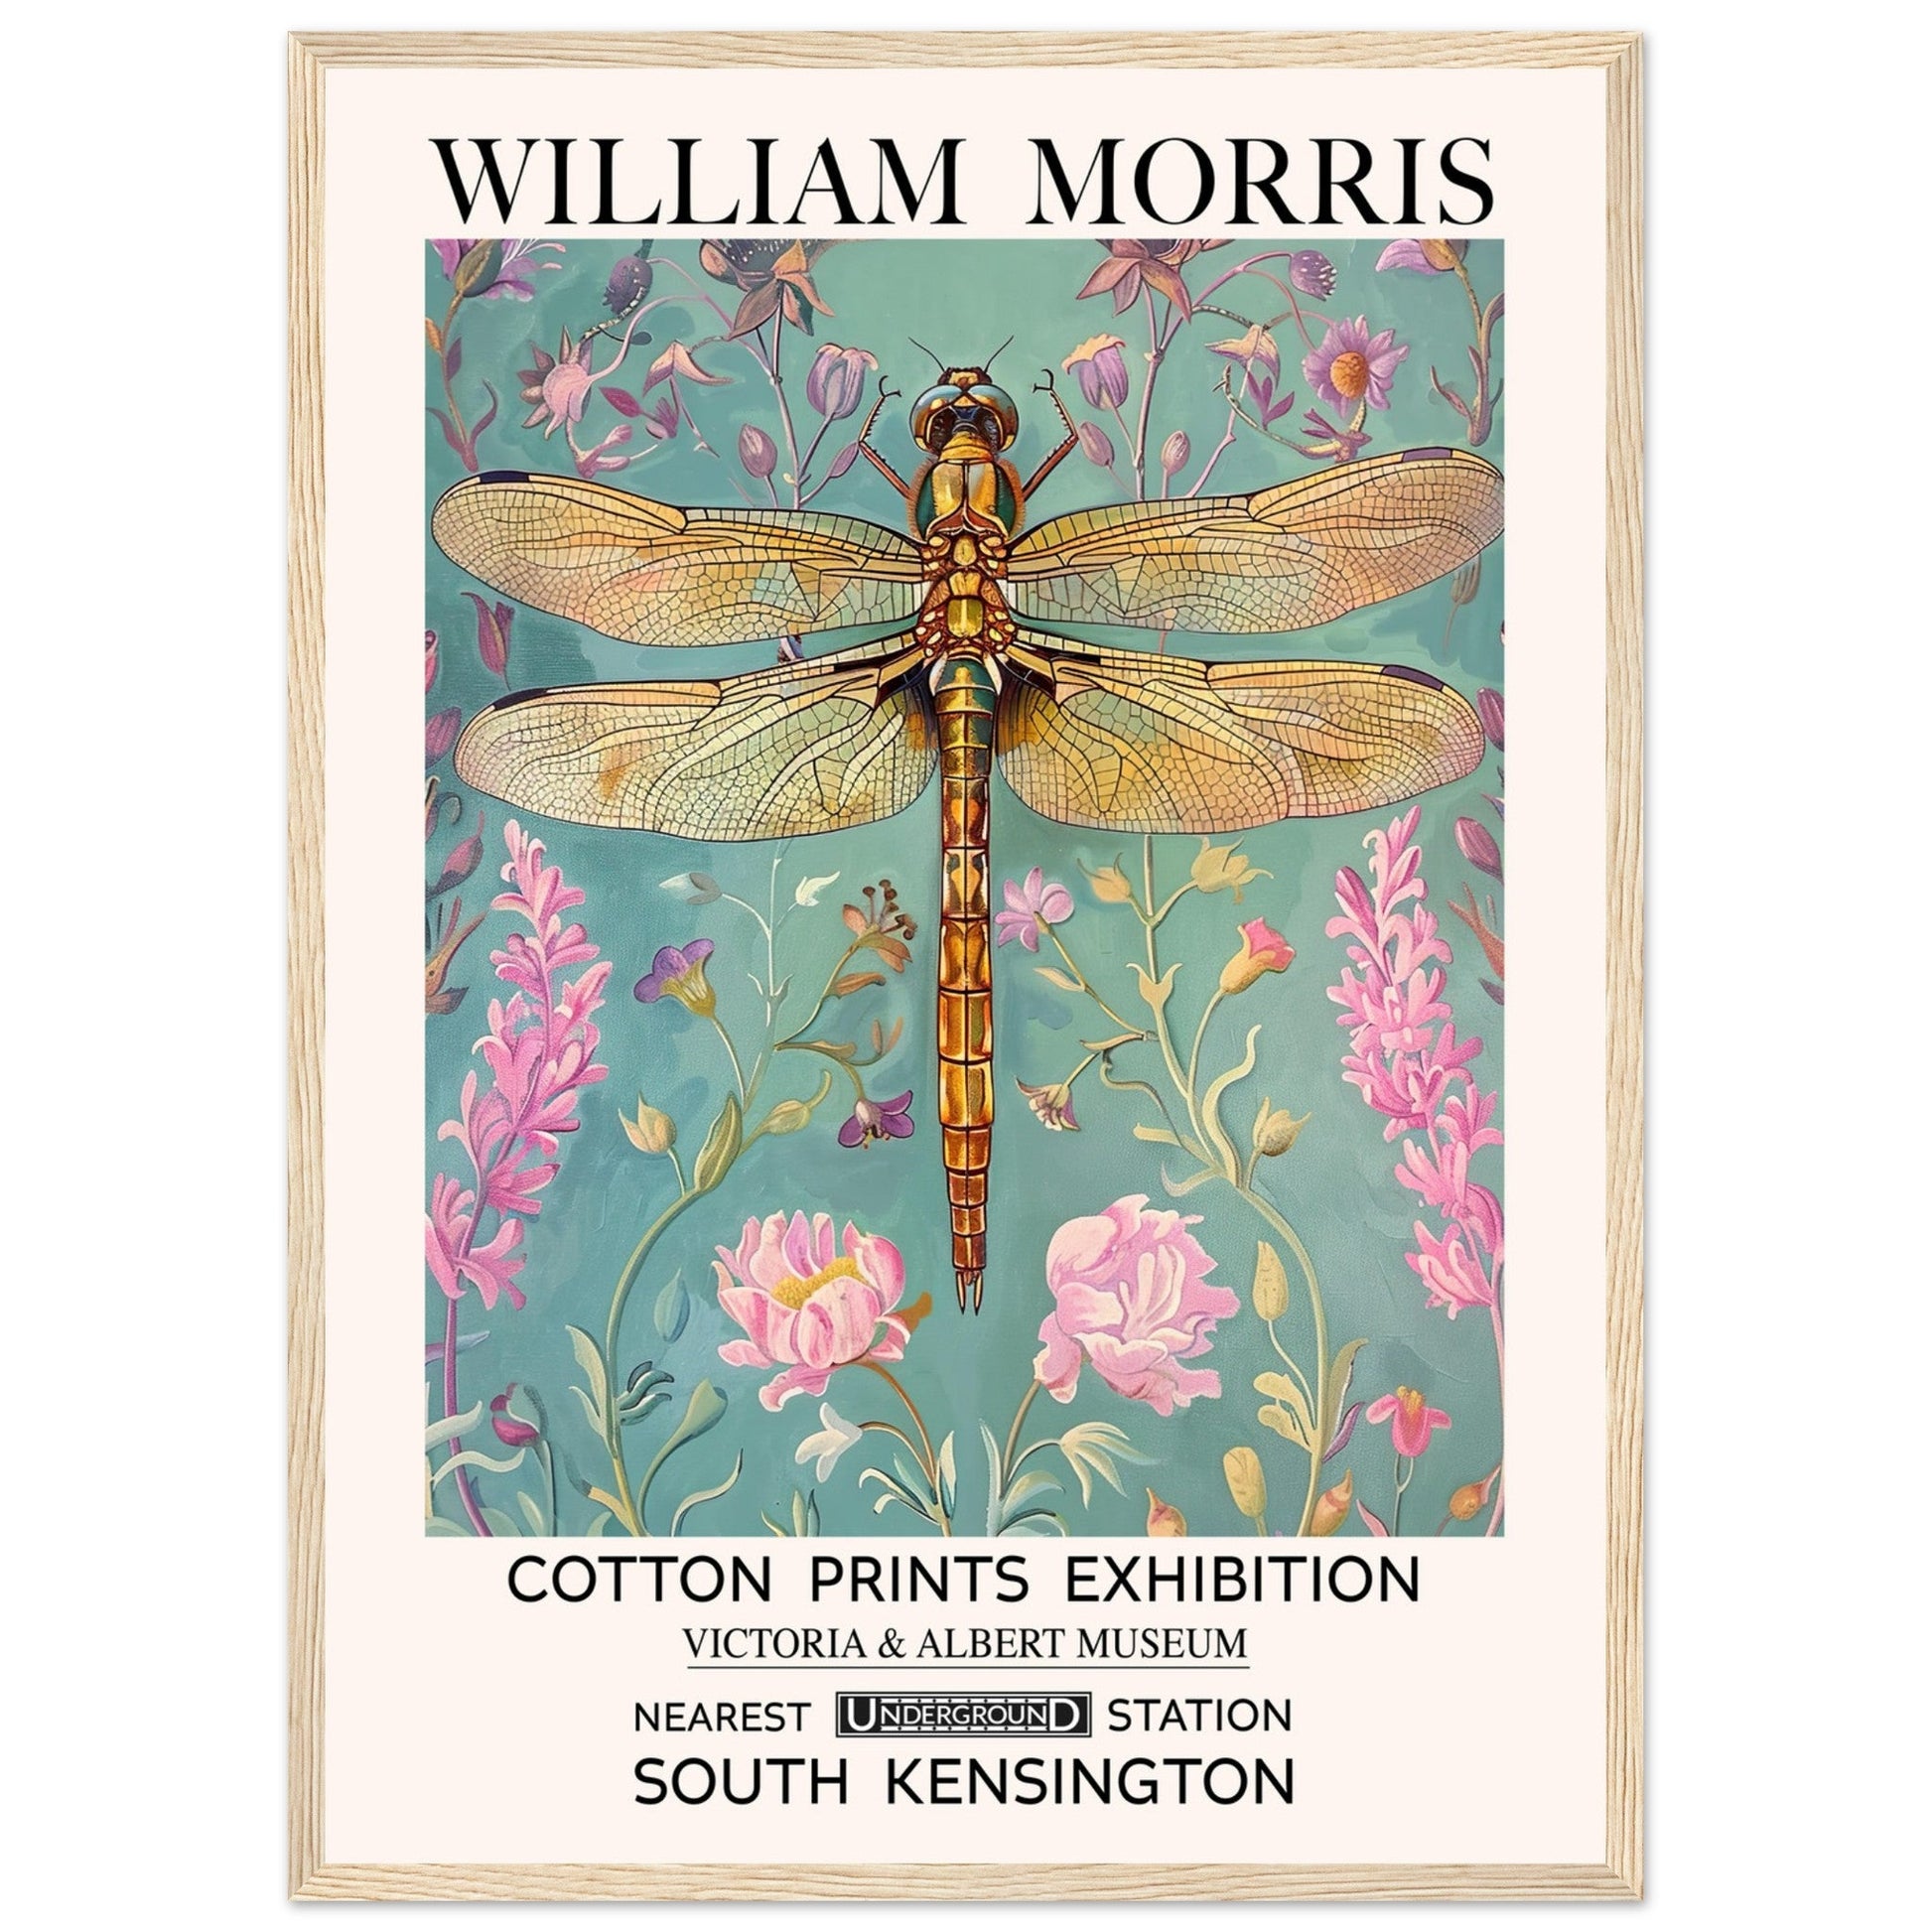 William Morris Framed Print - The Dragonfly, Blue, Floral Background, Framed Art print, #illieeart